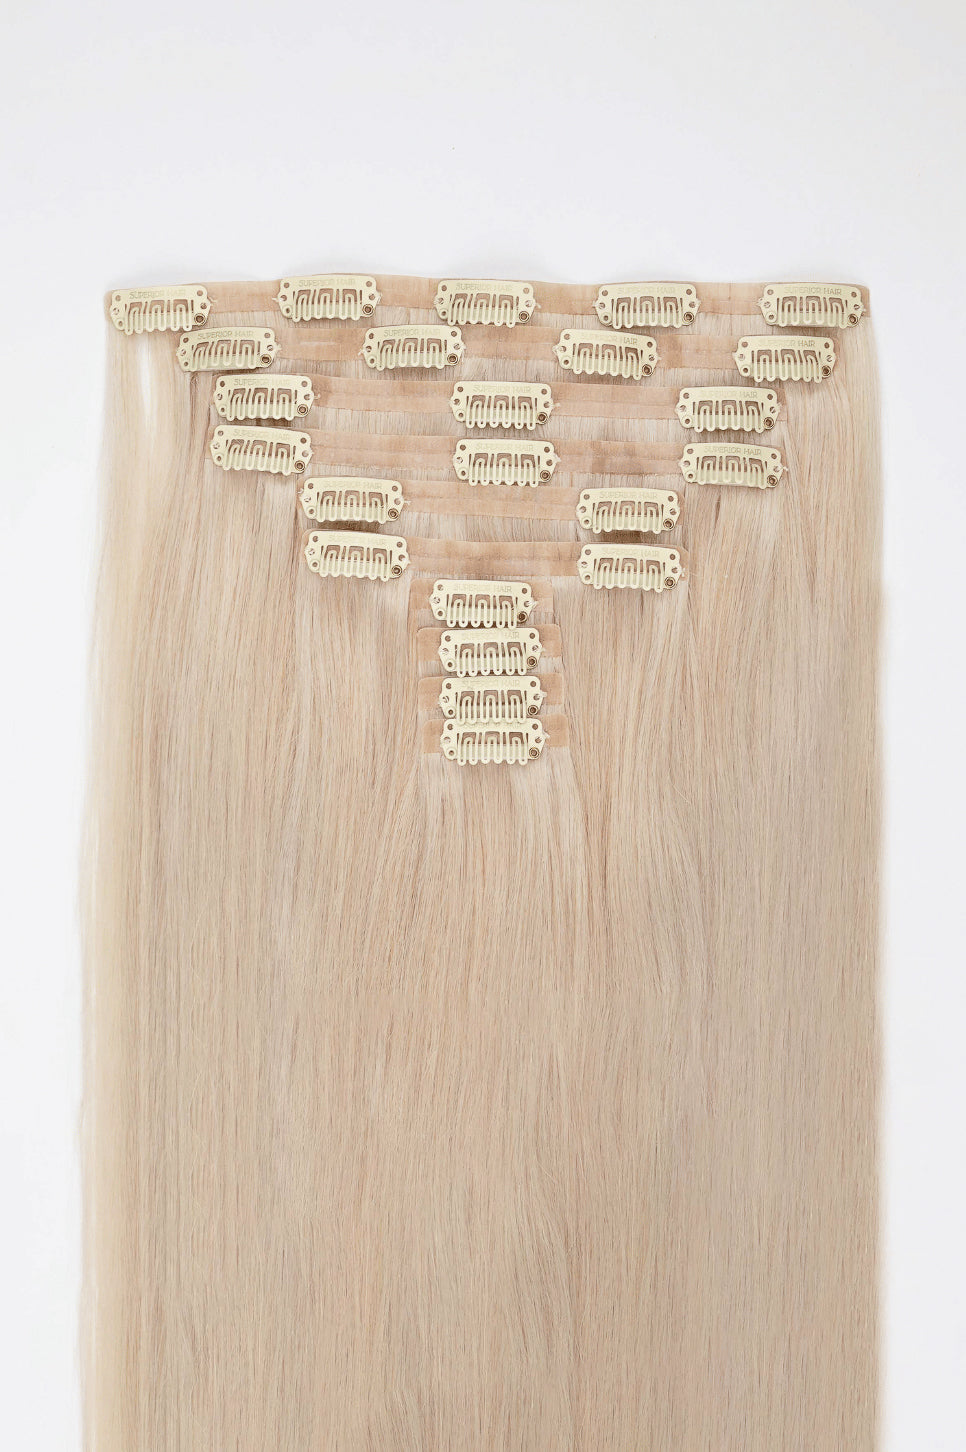 #60 Whitest Ash Blonde Seamless Clip In Extensions